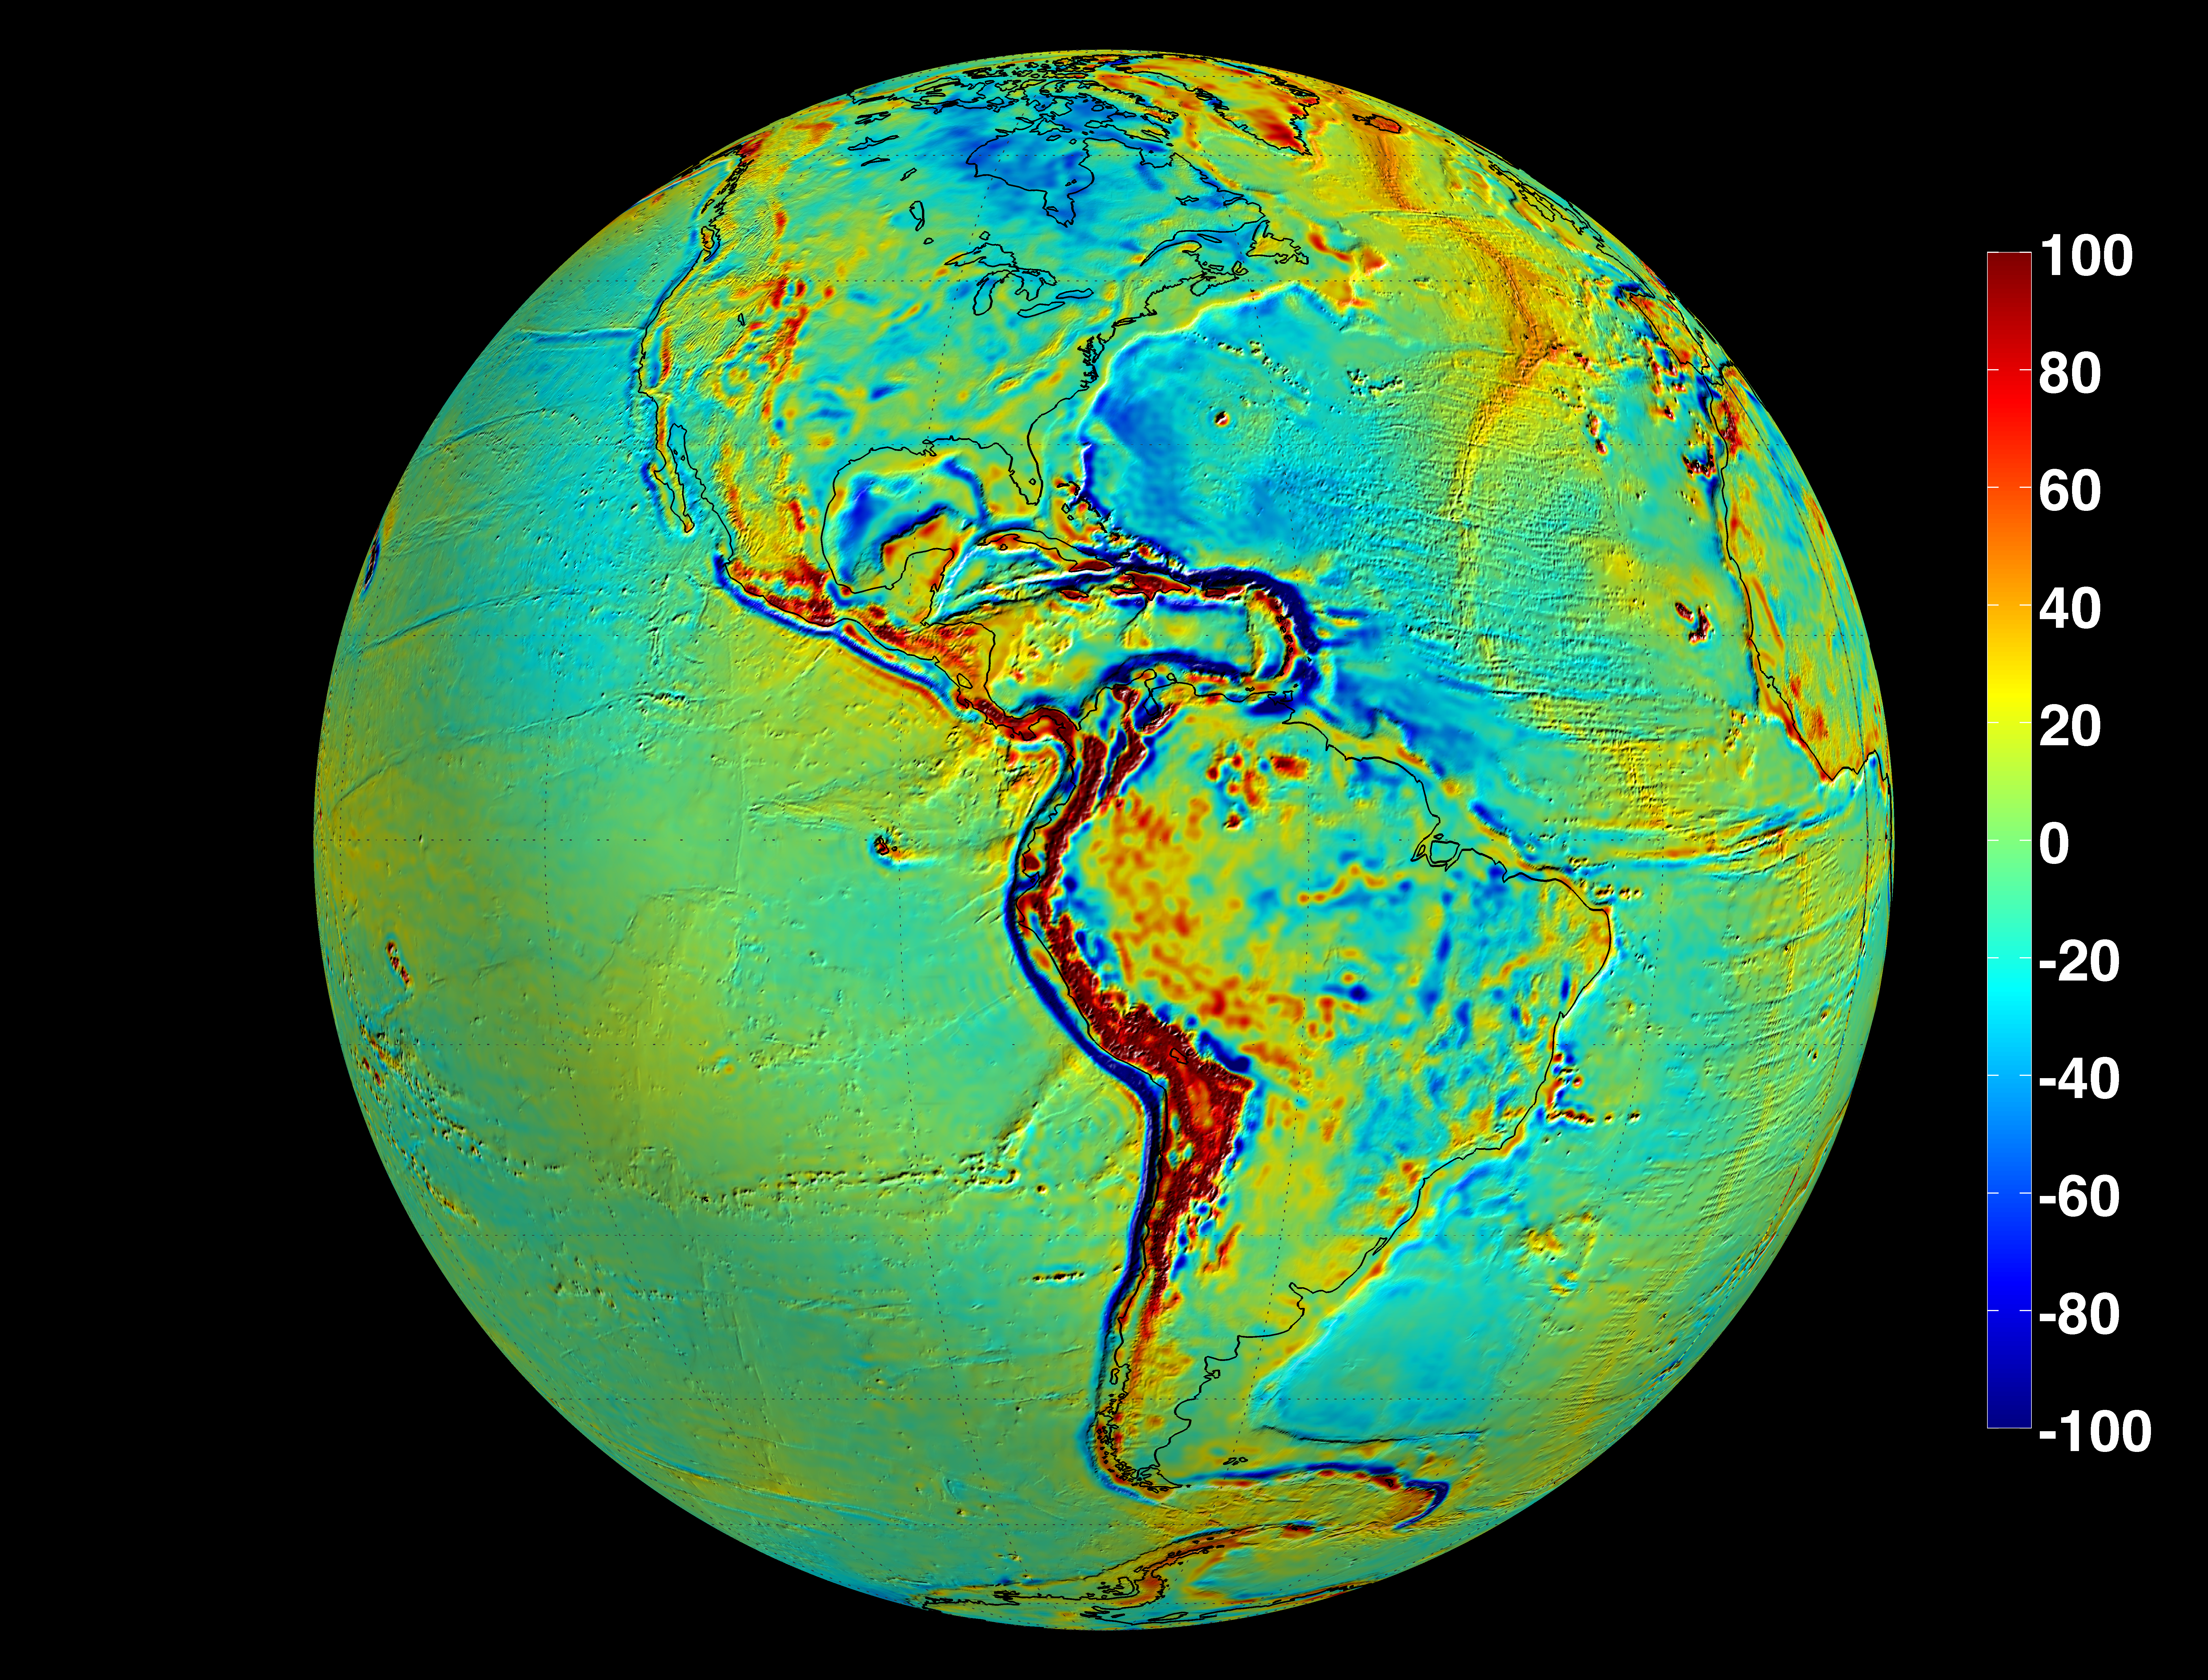 The GRACE Intermediate Field 48 (GIF48 from UT-CSR) field model is an improved mean gravity field that combines GRACE observations and terrestrial gravity information The terrestrial gravity information was taken from the DTU10 global gravity field.  Shown here are the so-called free air gravity deviations from an ideal ellipsoidal Earth model, in units of milli-gal. Areas colored yellow, orange, or red are areas where the actual gravity field is larger than the featureless-Earth model predicts, while the progressively darker shades of blue indicate places where the gravity field is less.